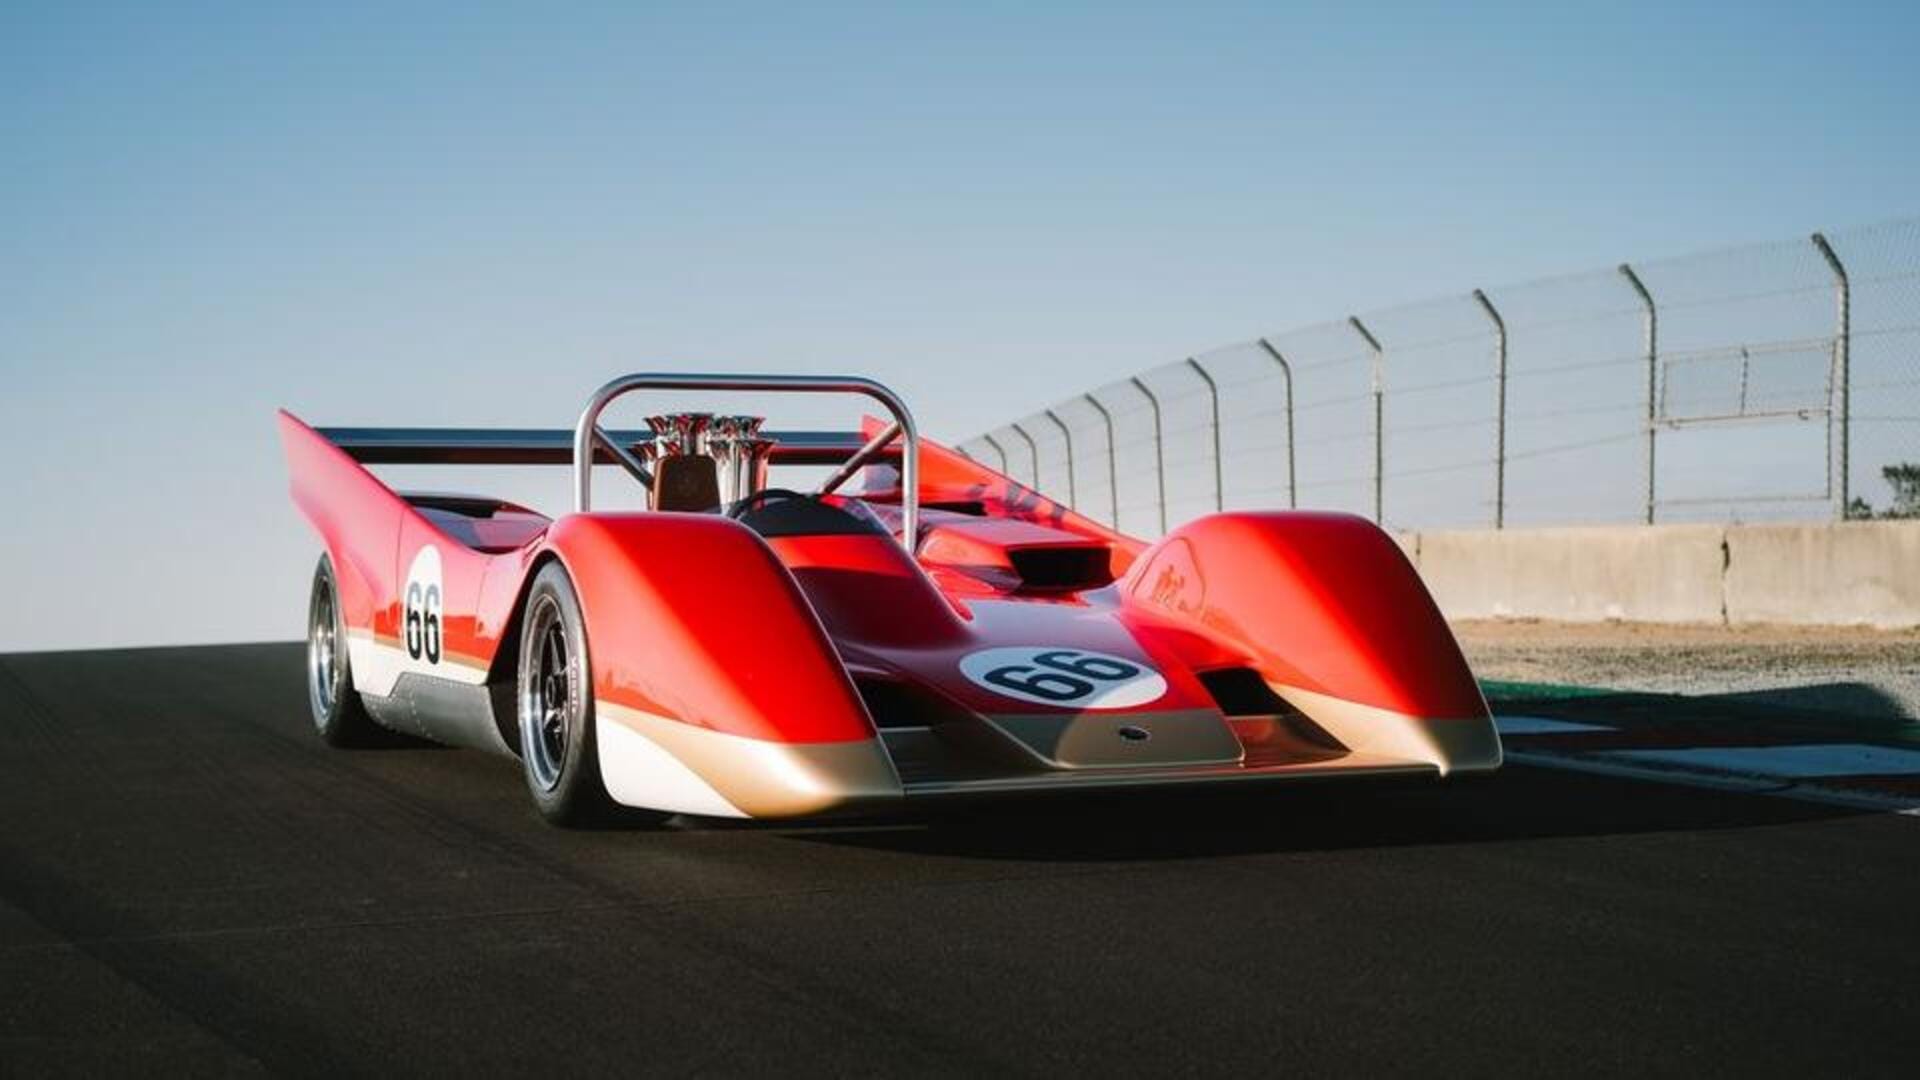 Lotus revives Type 66 as a limited-run race car